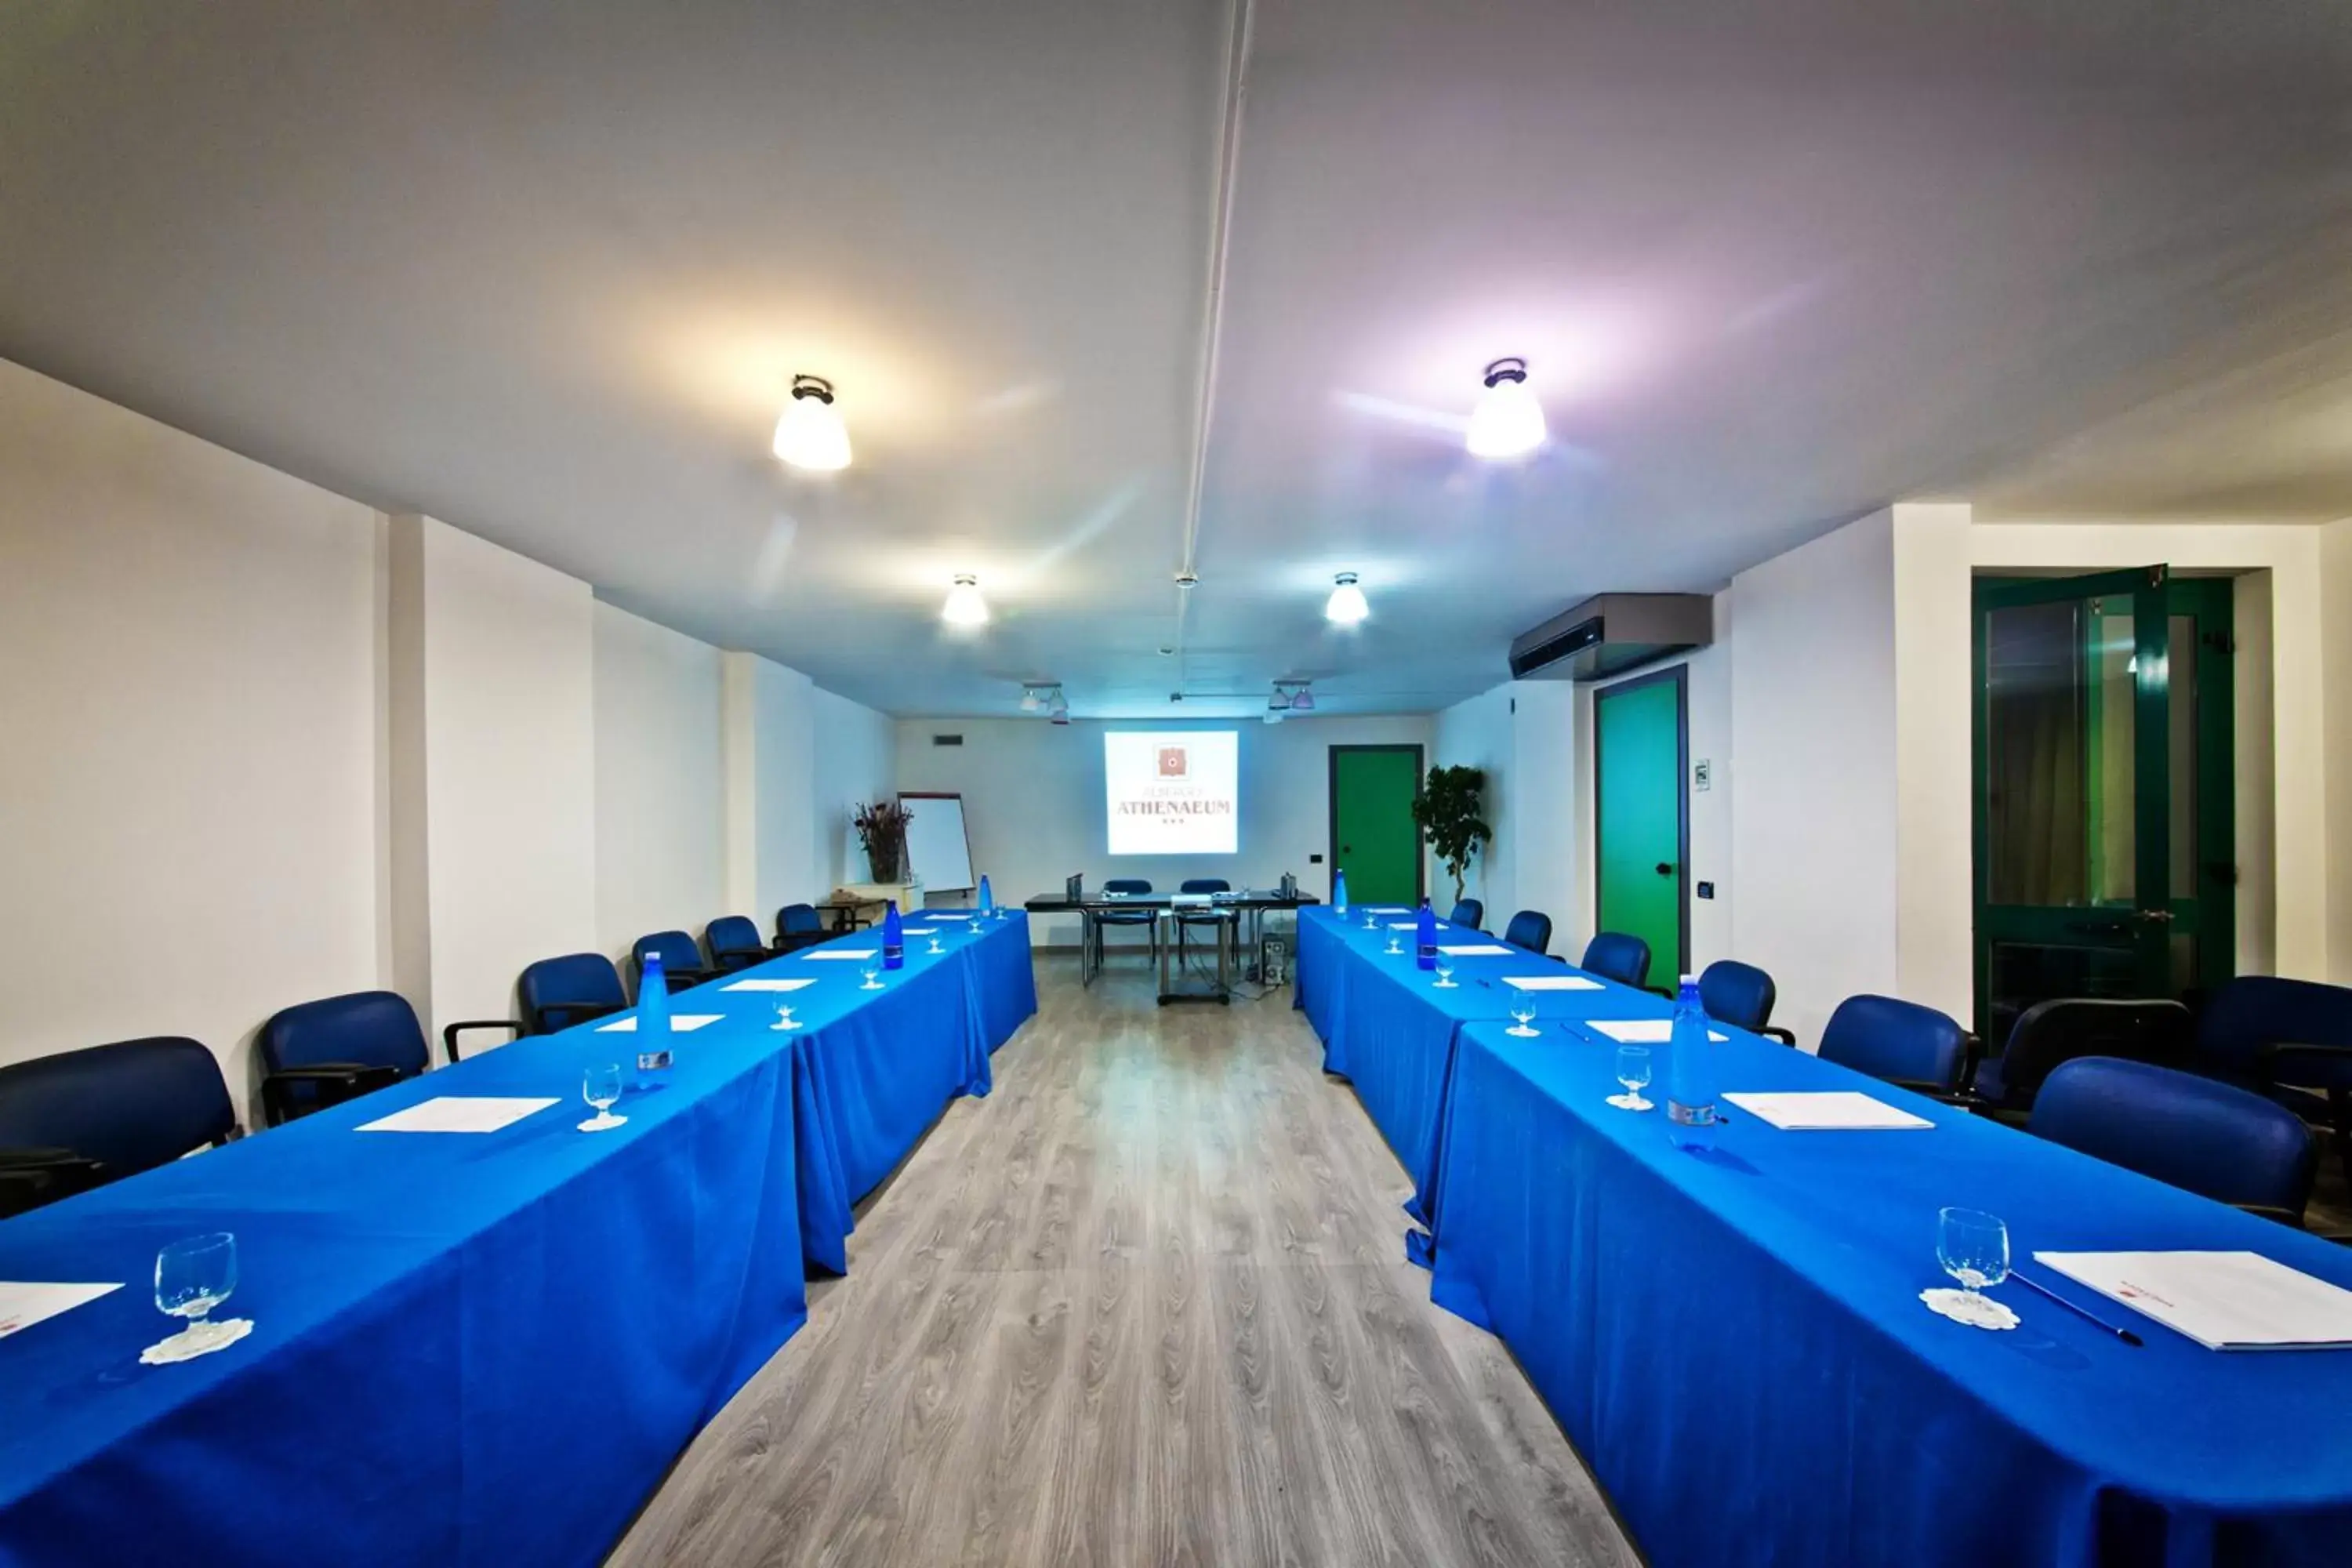 Meeting/conference room in Albergo Athenaeum